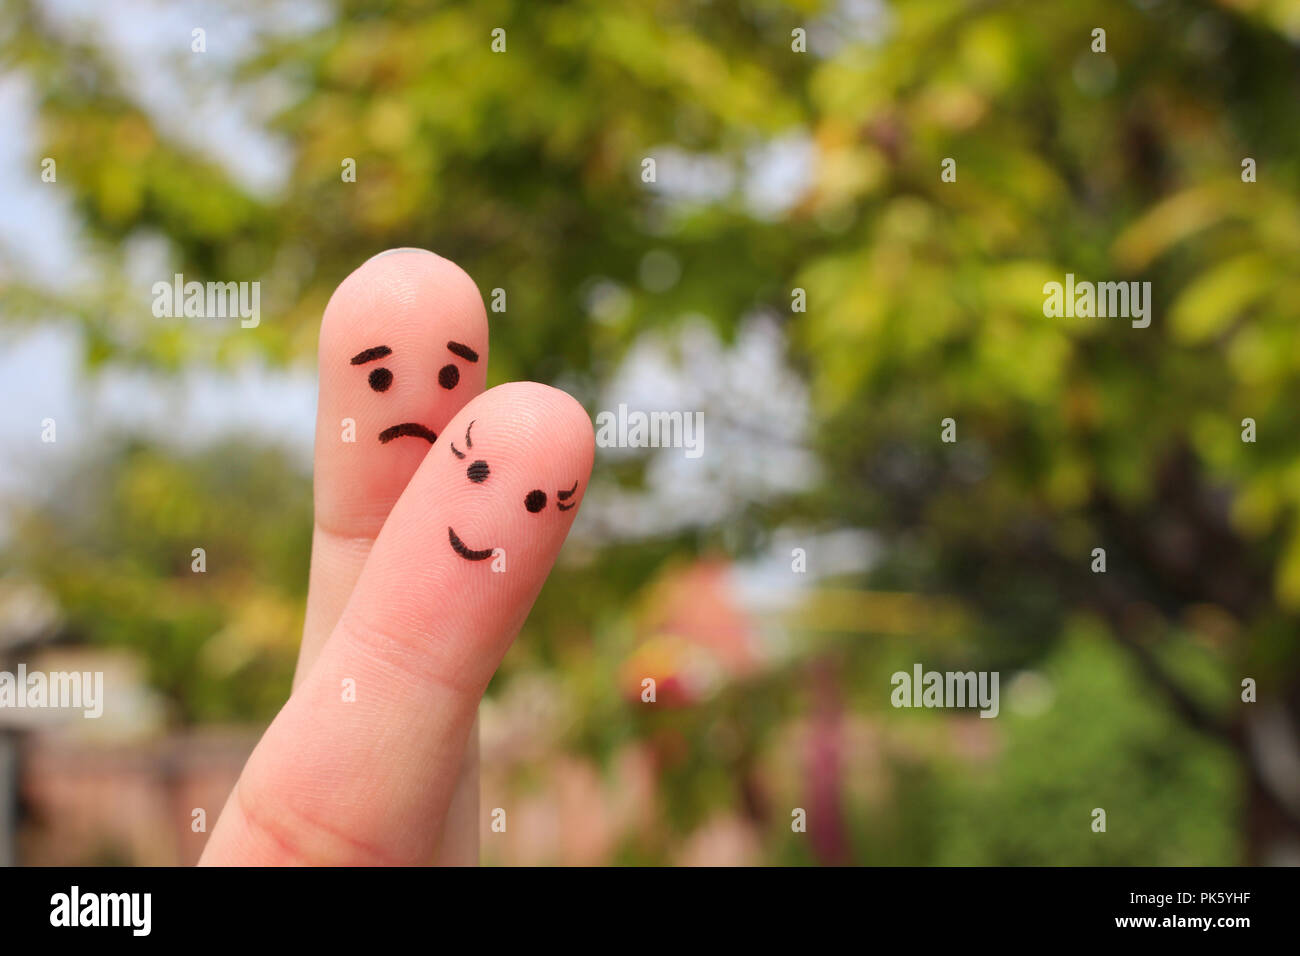 Finger art of couple. Woman is cheerful, man is sad. Stock Photo